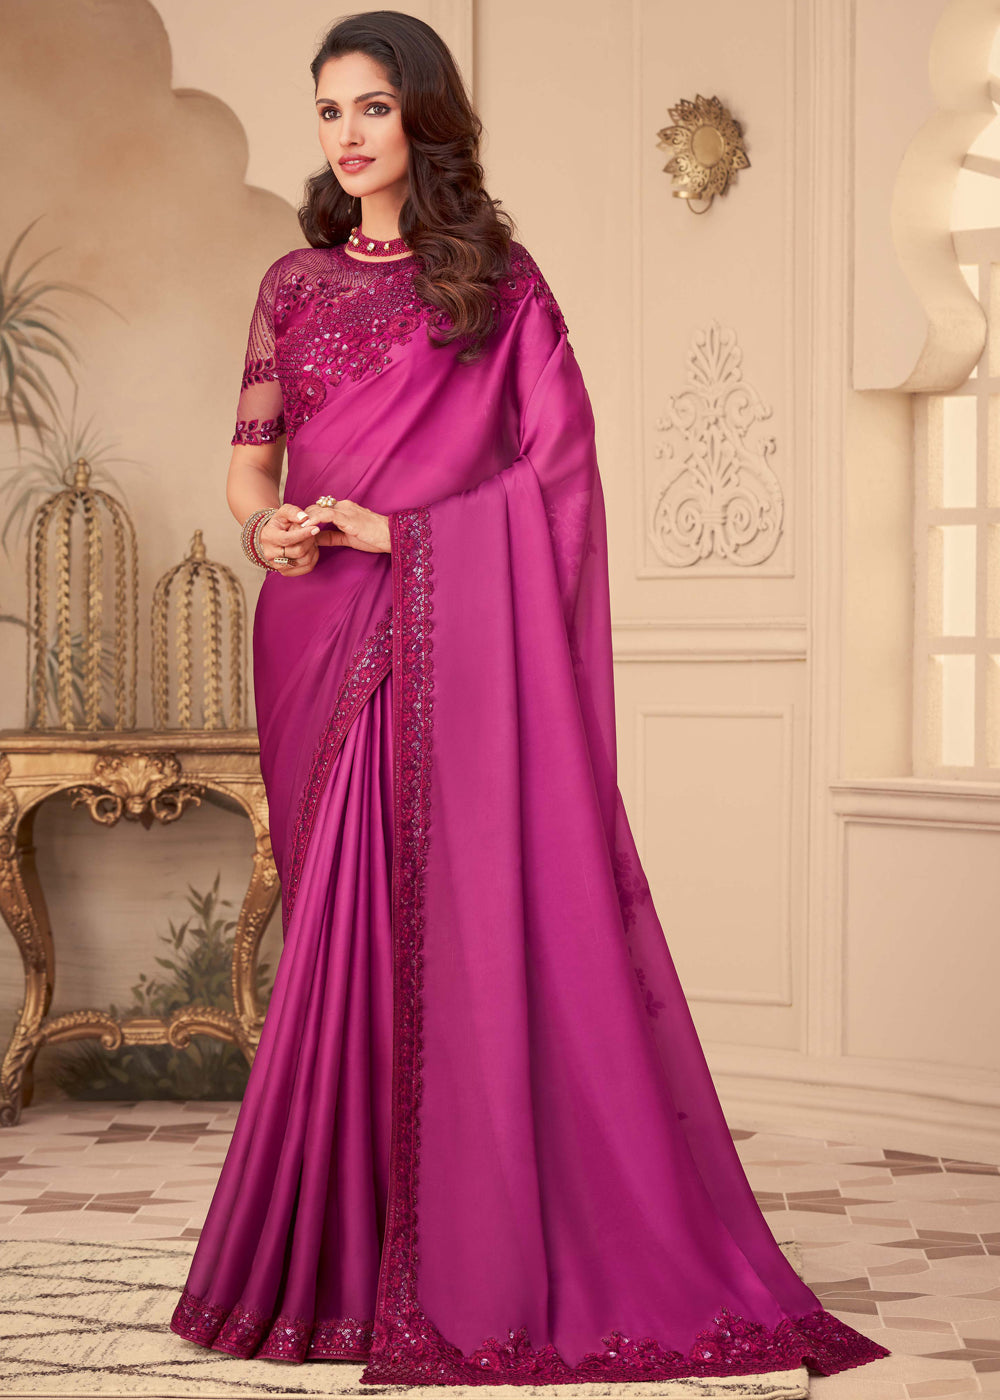 Buy MySilkLove Mystic Pearl Pink Georgette Designer Saree with Embroidered Blouse Online